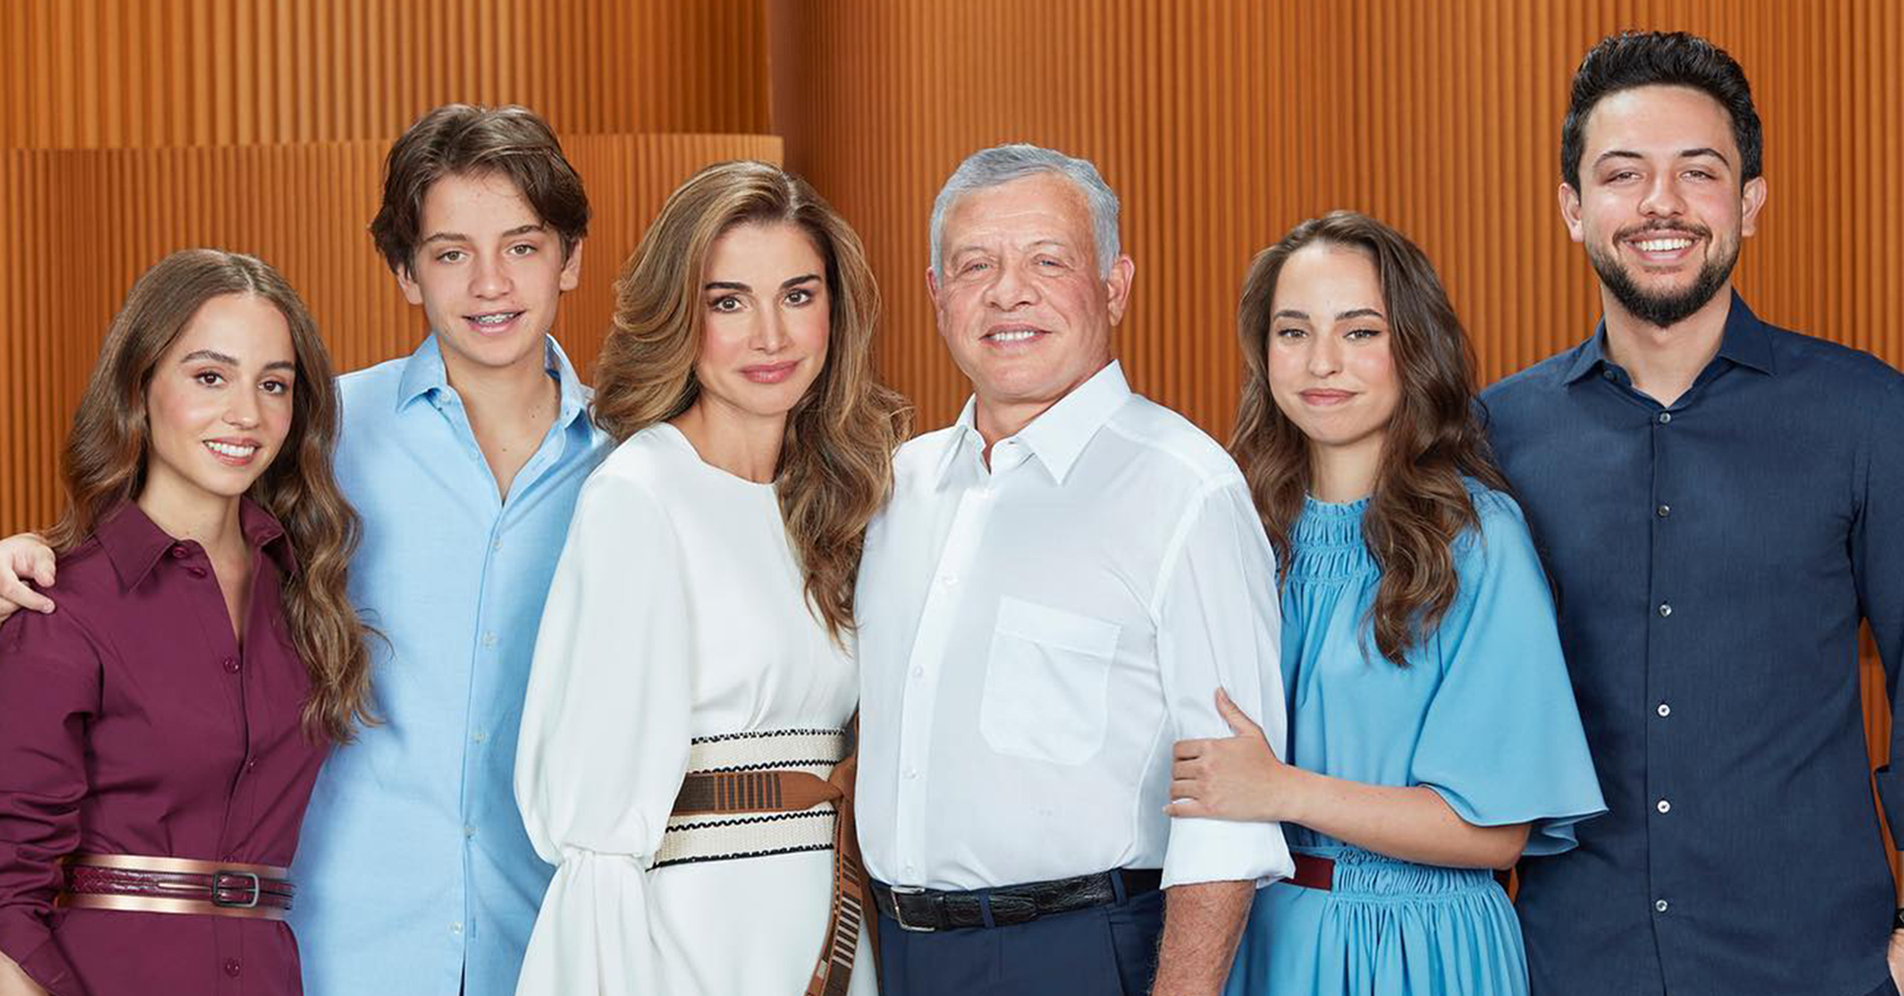 Queen Rania of Jordan’s gorgeous family prove the British royals aren’t the only ones to watch